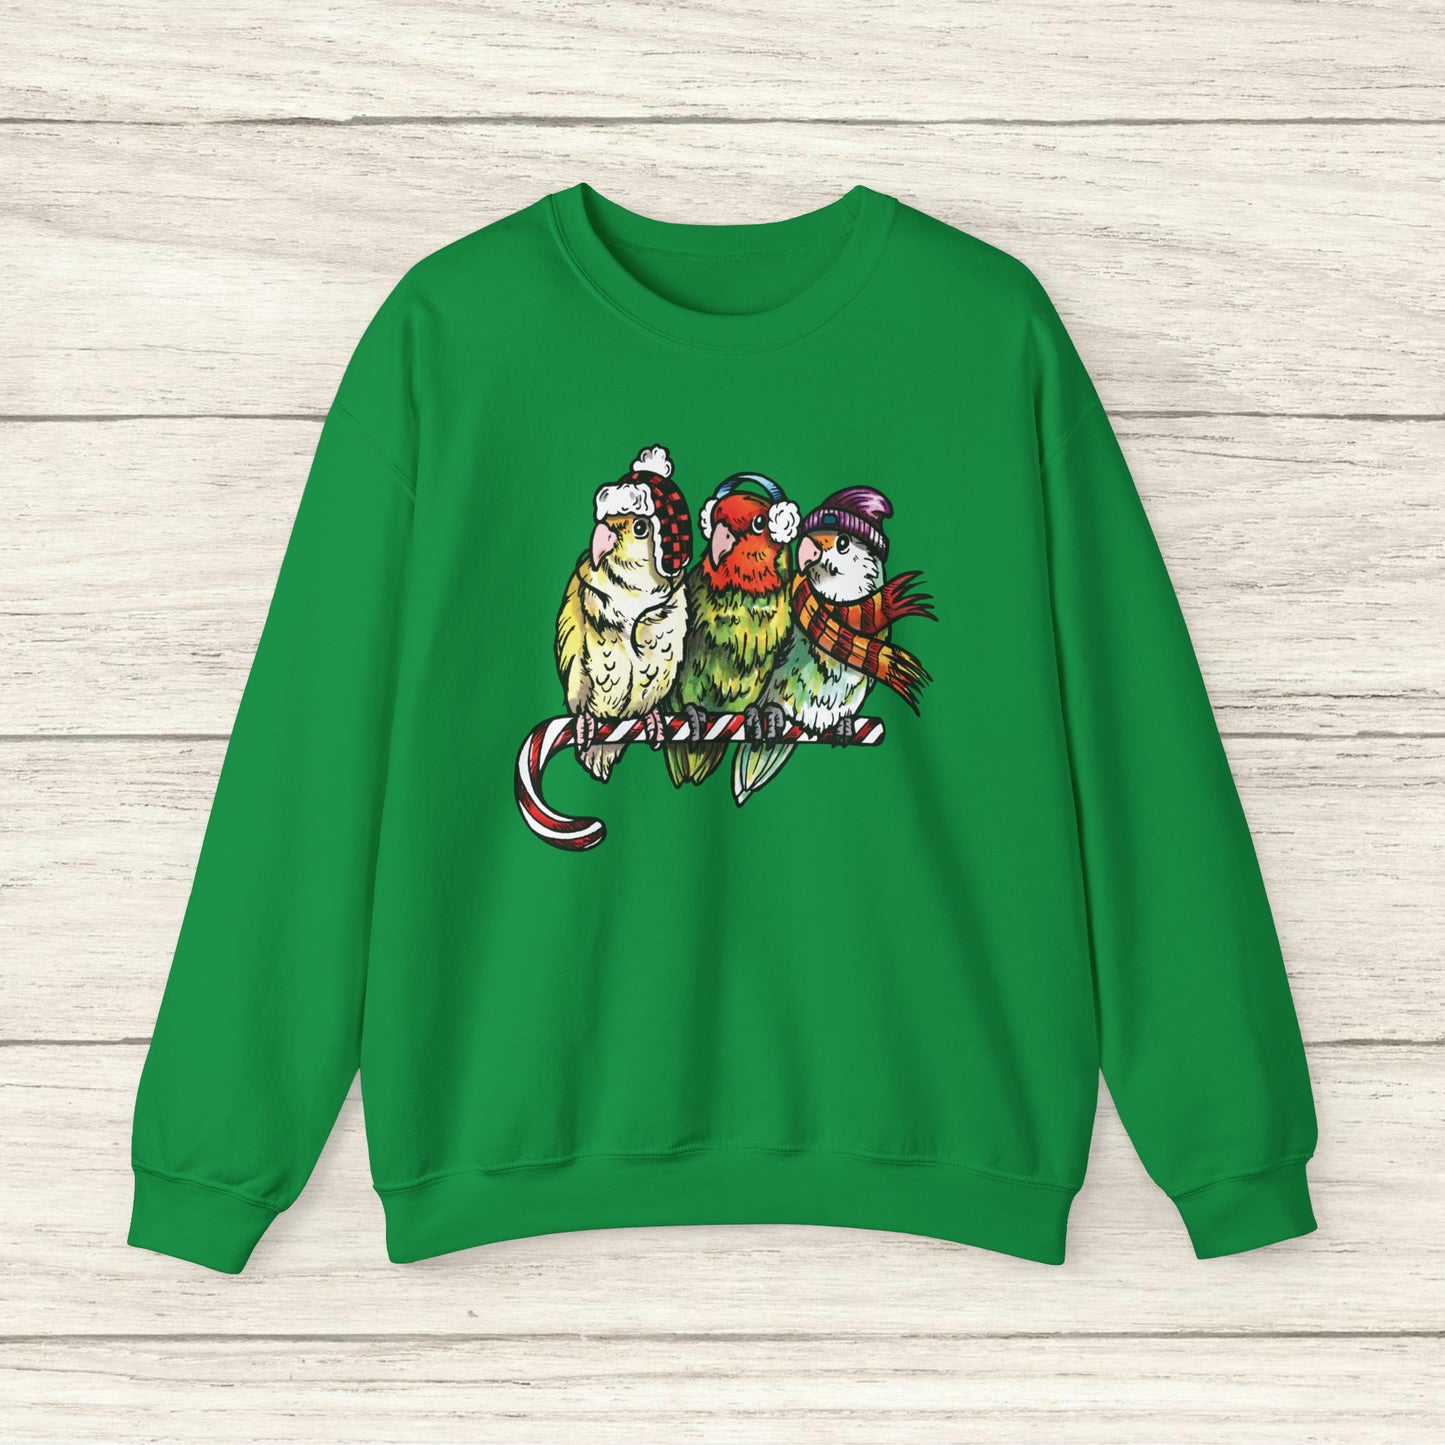 3 Lovebirds with Winter Wear & Perched on a Candy Cane, Crew Neck Sweatshirt